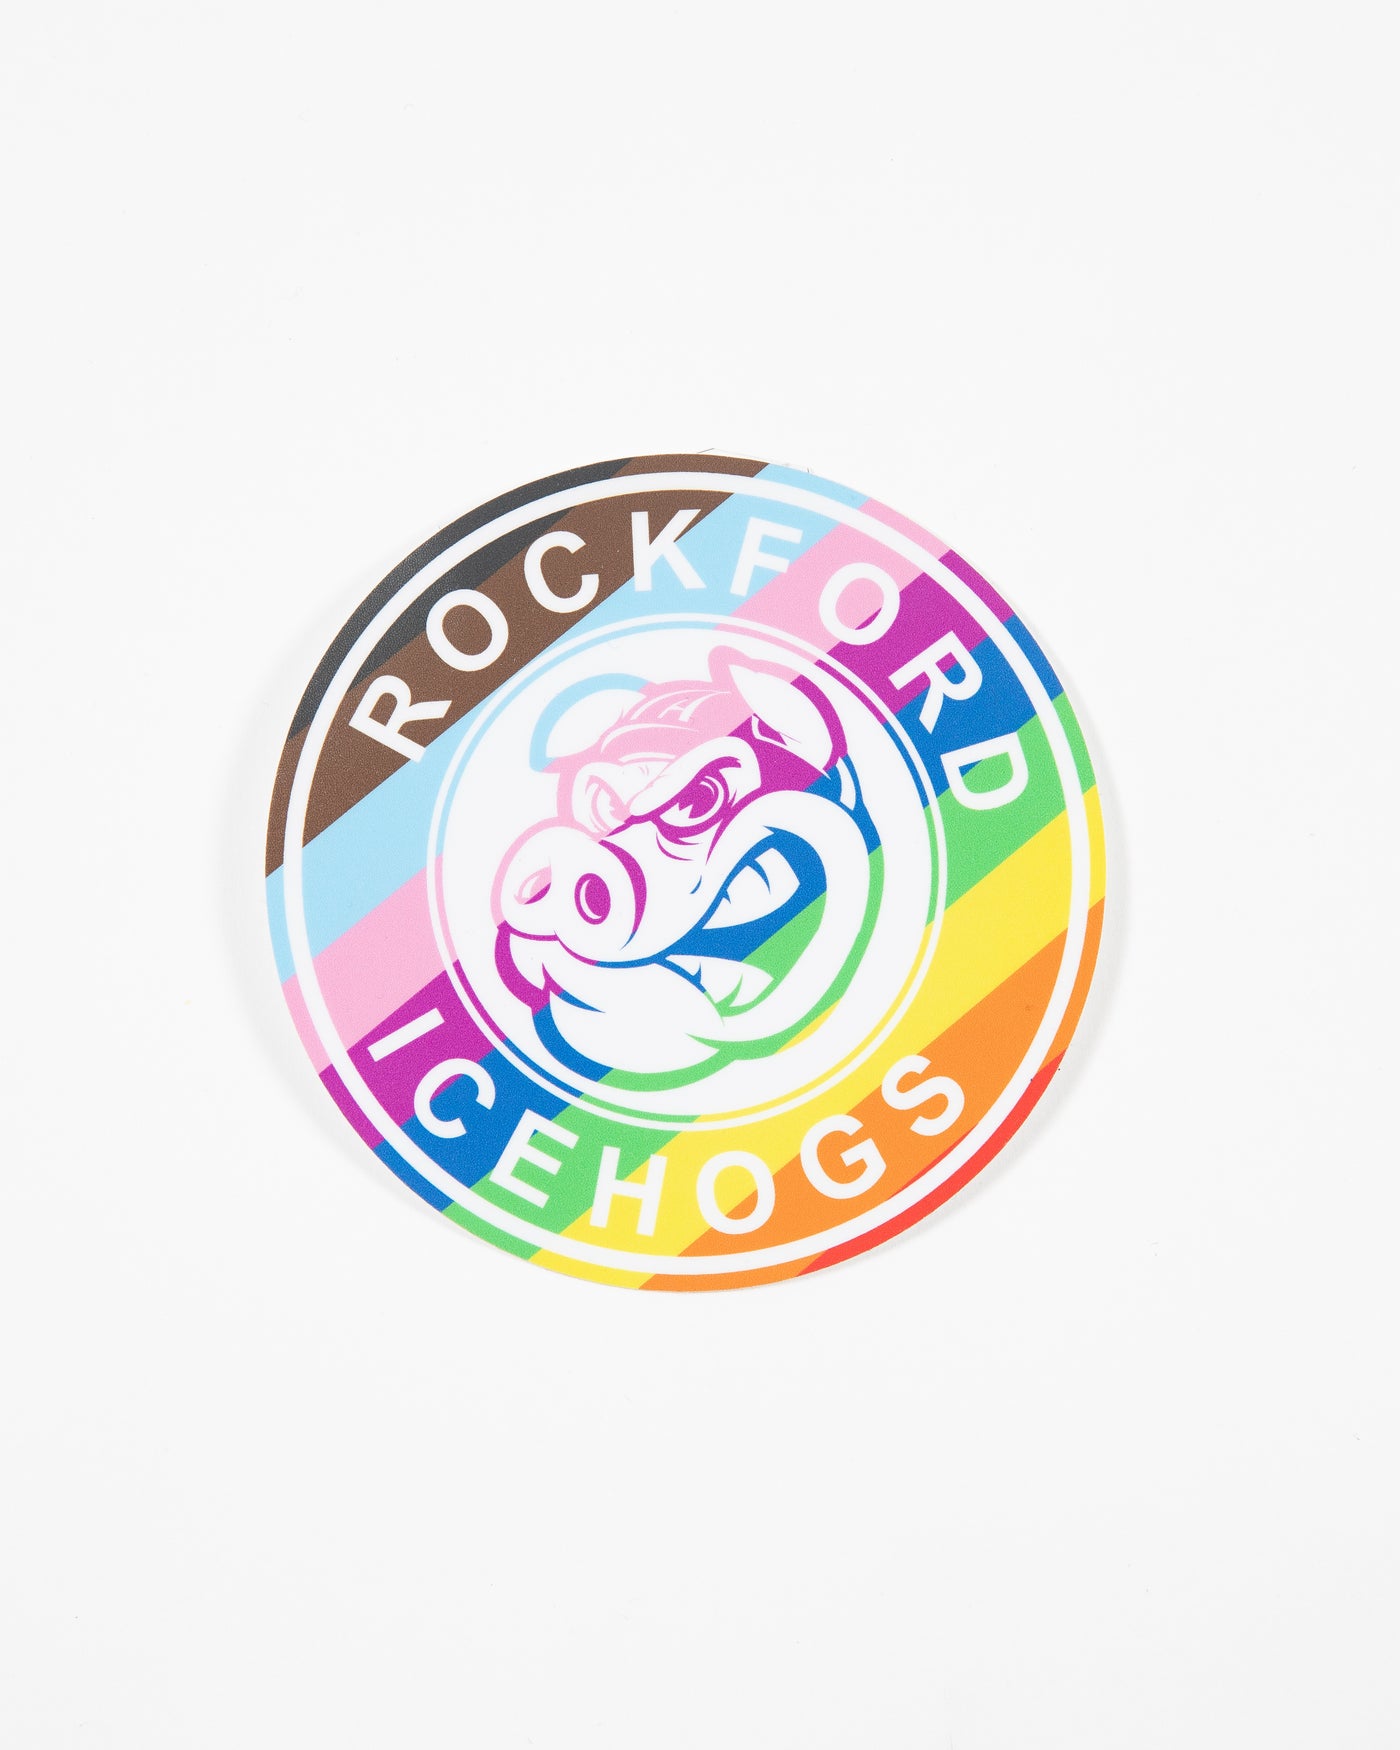 Rockford IceHogs decal with Hammy logo in Pride colorway - front lay flat